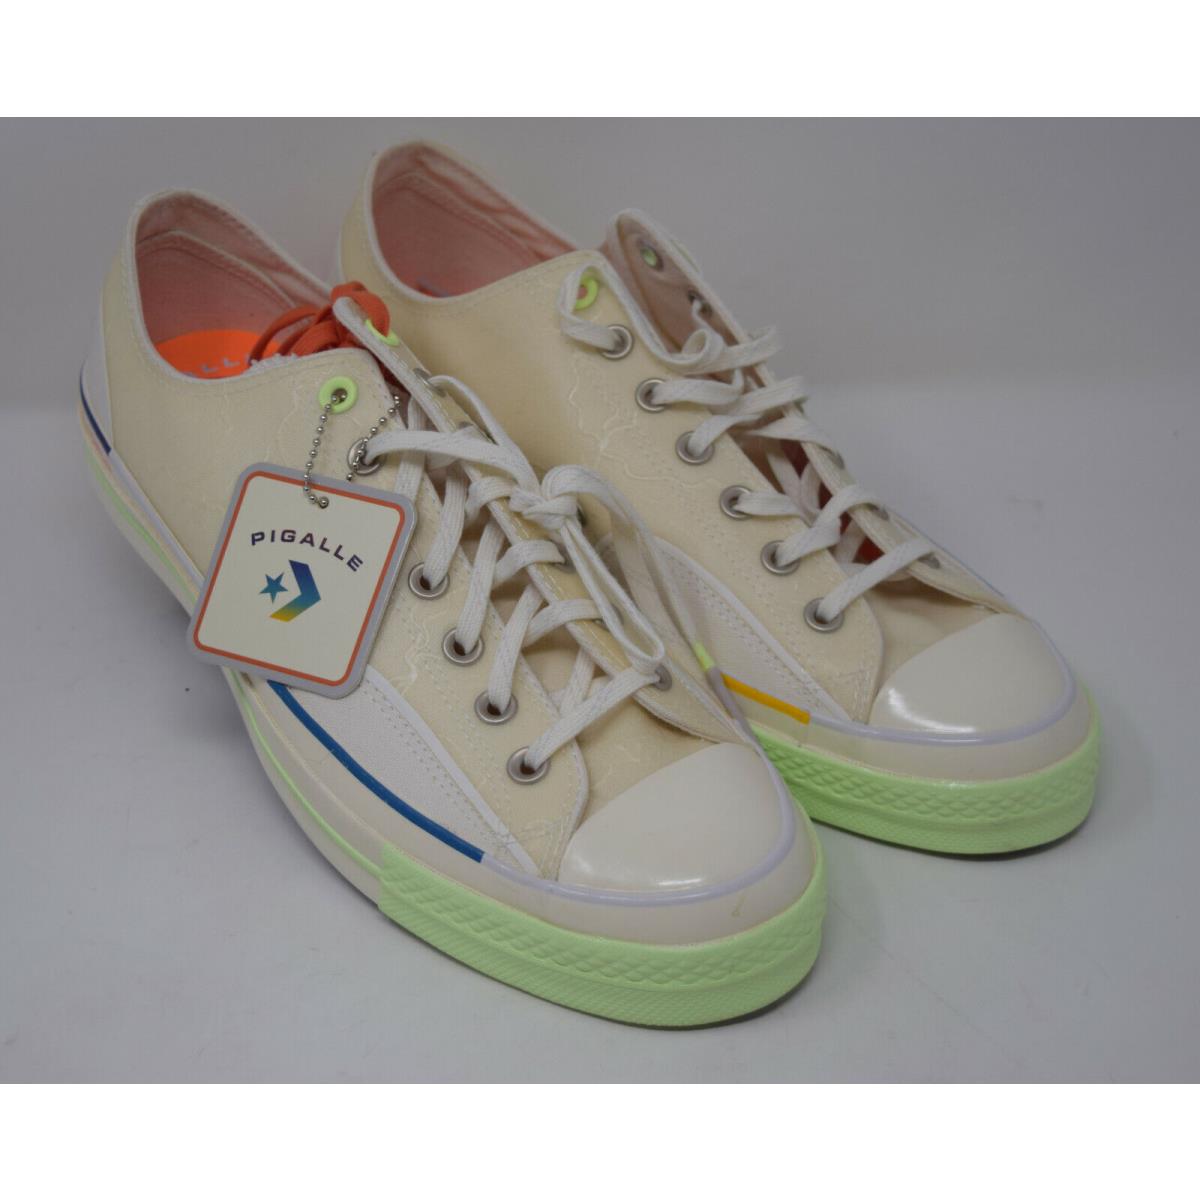 Pigalle x Chuck 70 Low Barely Volt 165748C Converse Sneakers Shoes 11.5 US